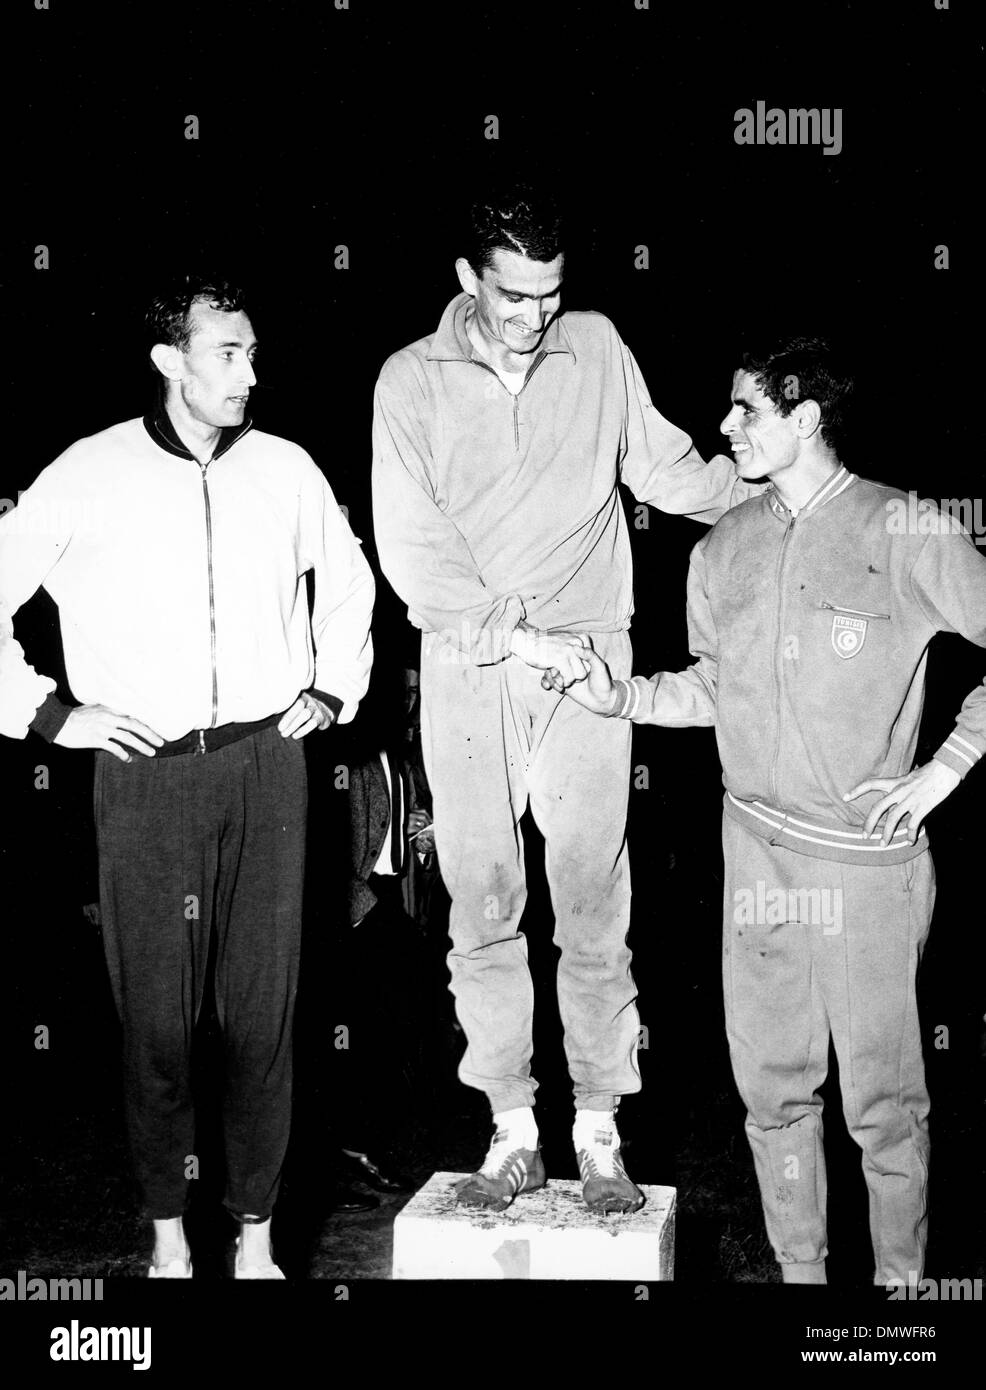 Jul 10, 1965 - Paris, France - (File Photo) RON CLARKE (Ronald William Clarke) is an Australian athlete, and one of the best known middle and long distance runners of the 1960's. He is best remembered for setting seventeen world records. He won the bronze medal in the 10,000 m at the 1964 Summer Olympics, but never won an Olympic gold medal. At the 1968 Summer Olympics in Mexico Ci Stock Photo